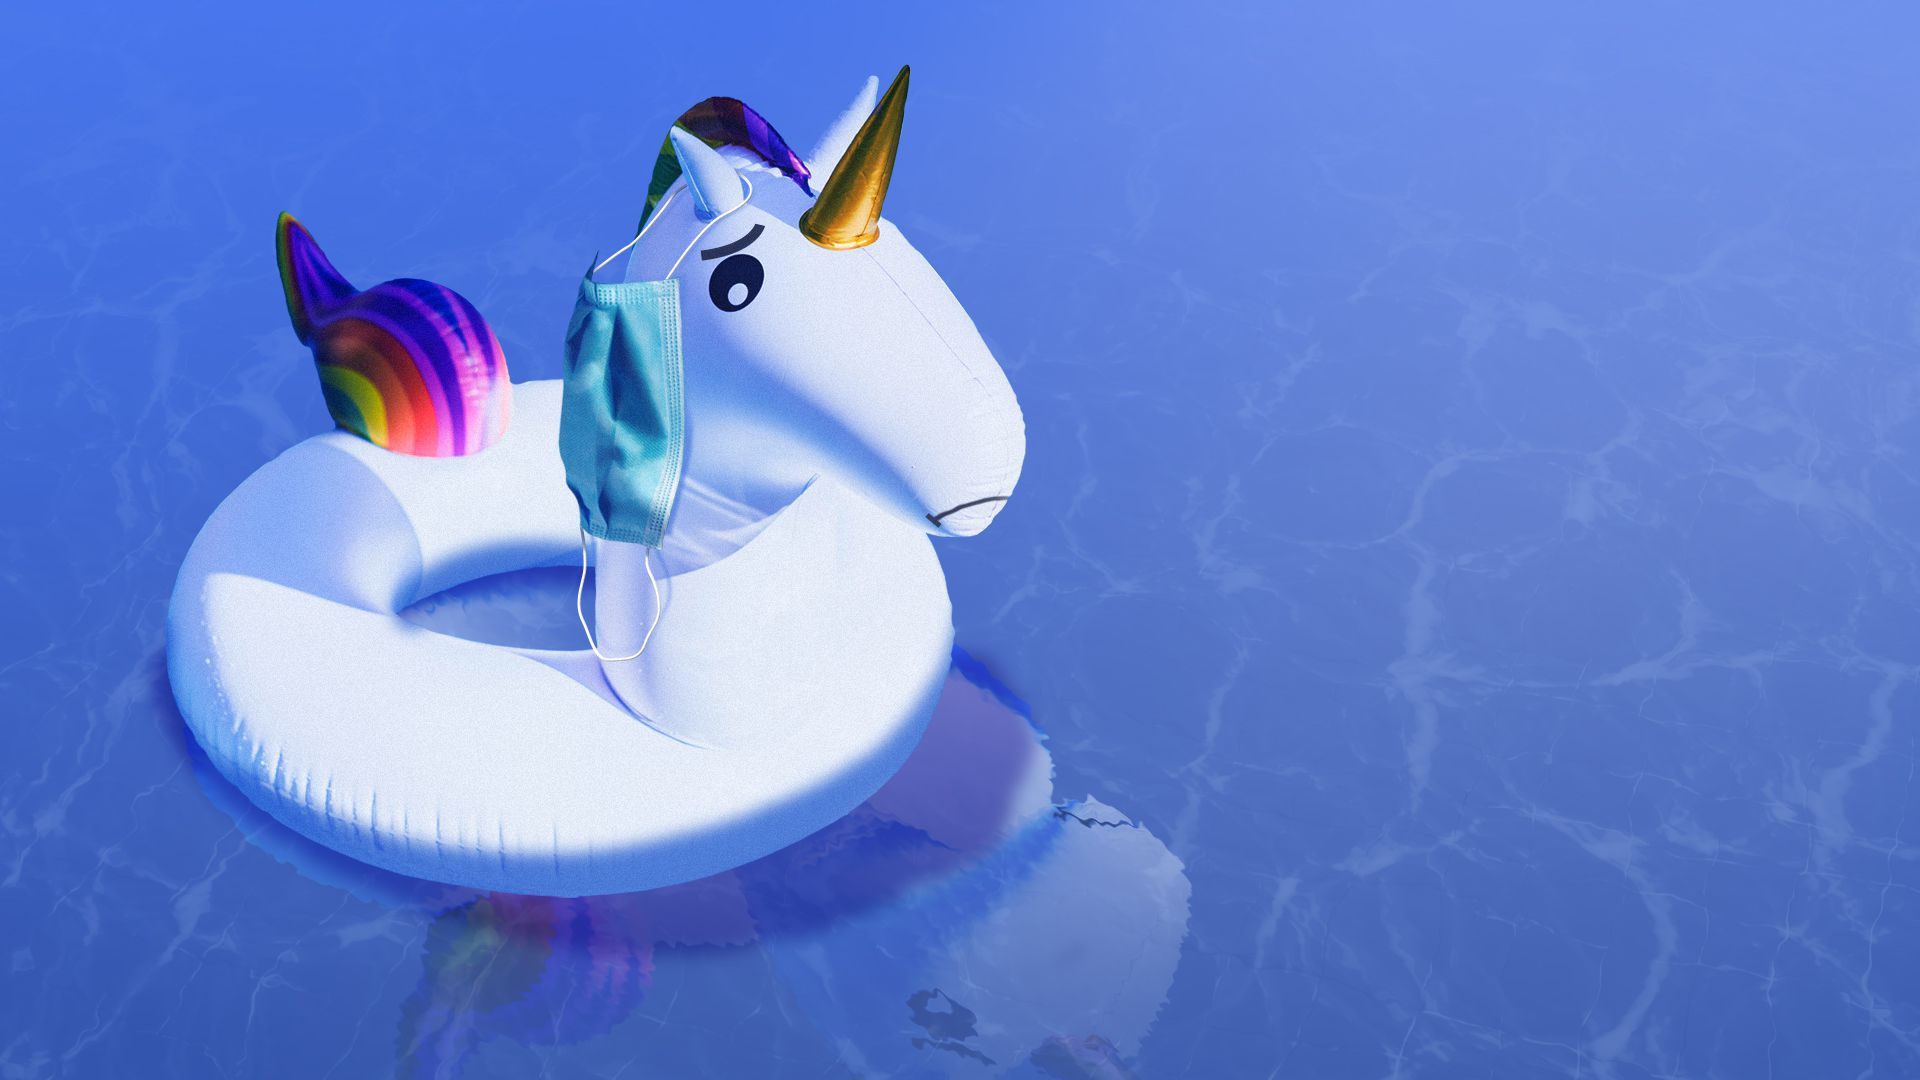 Illustration of a sad-looking inflatable unicorn pool tool with a mask